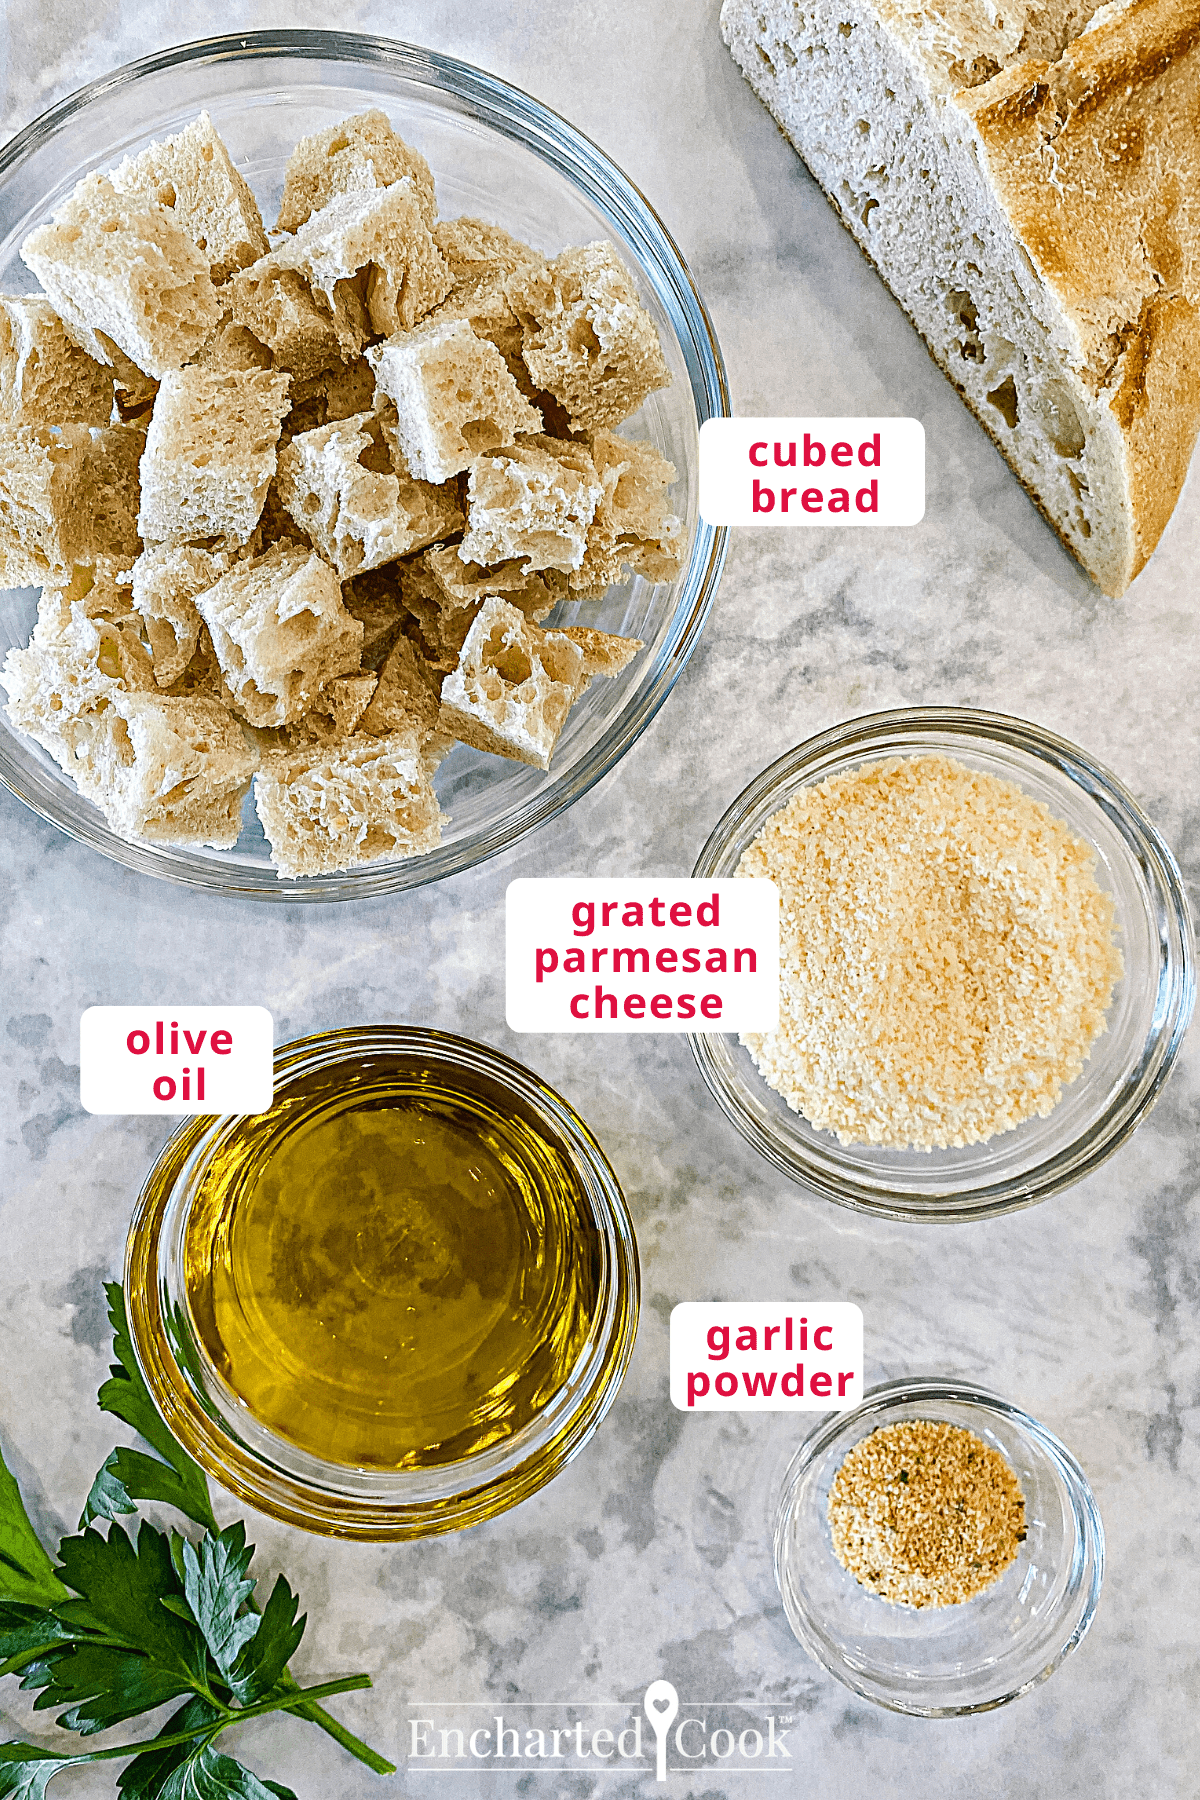 The ingredients, clockwise from top: cubed bread, grated parmesan cheese, garlic powder, and olive oil.